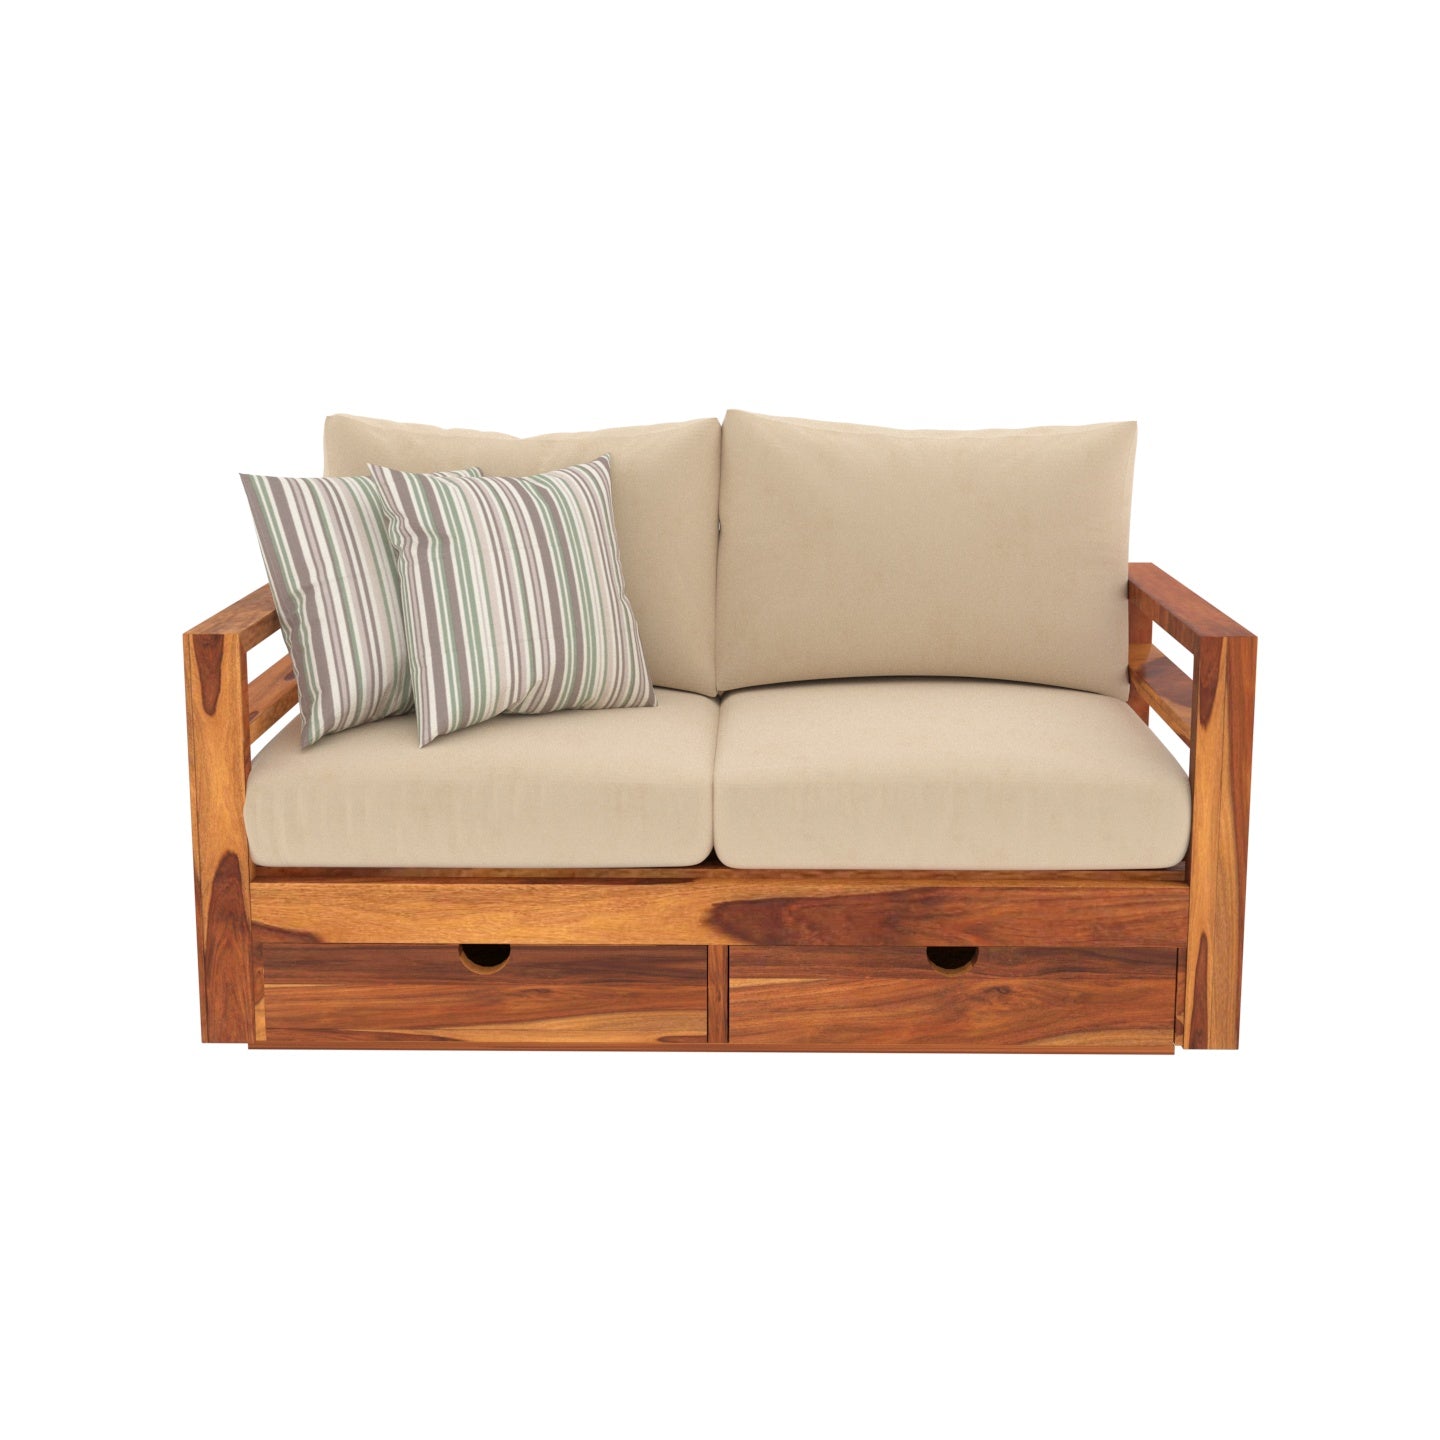 Moccasin Shaded Vintage Wooden Sofa With Storage Sofa